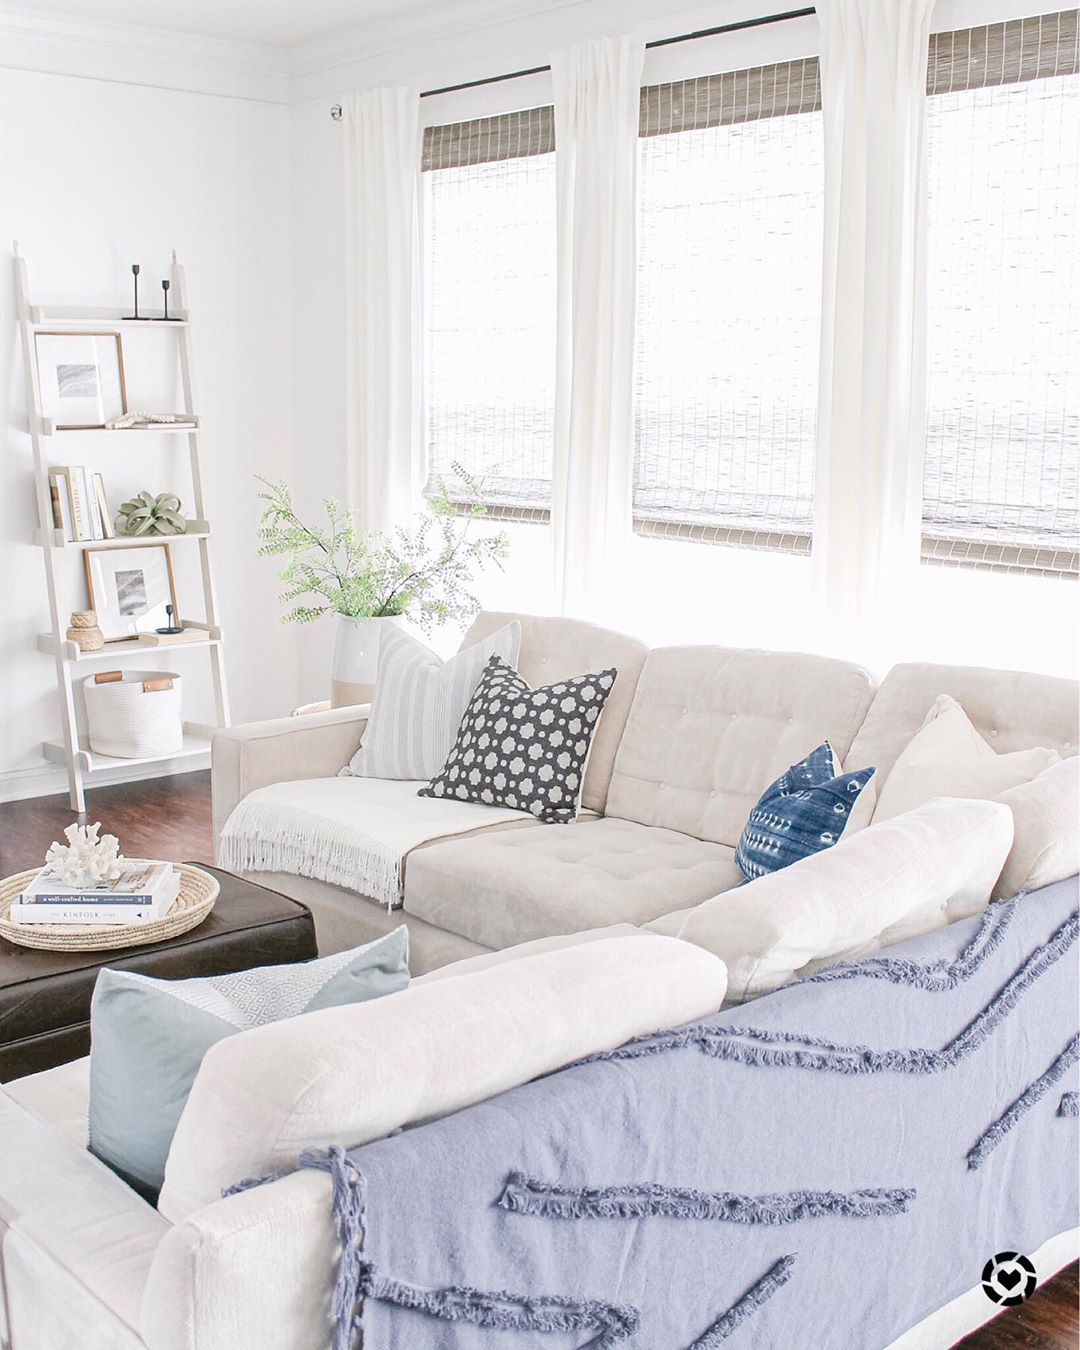 White living room with blue blankets and blue pillows decorated in Coastal style. Photo by Instagram user @caitlinmariedesign